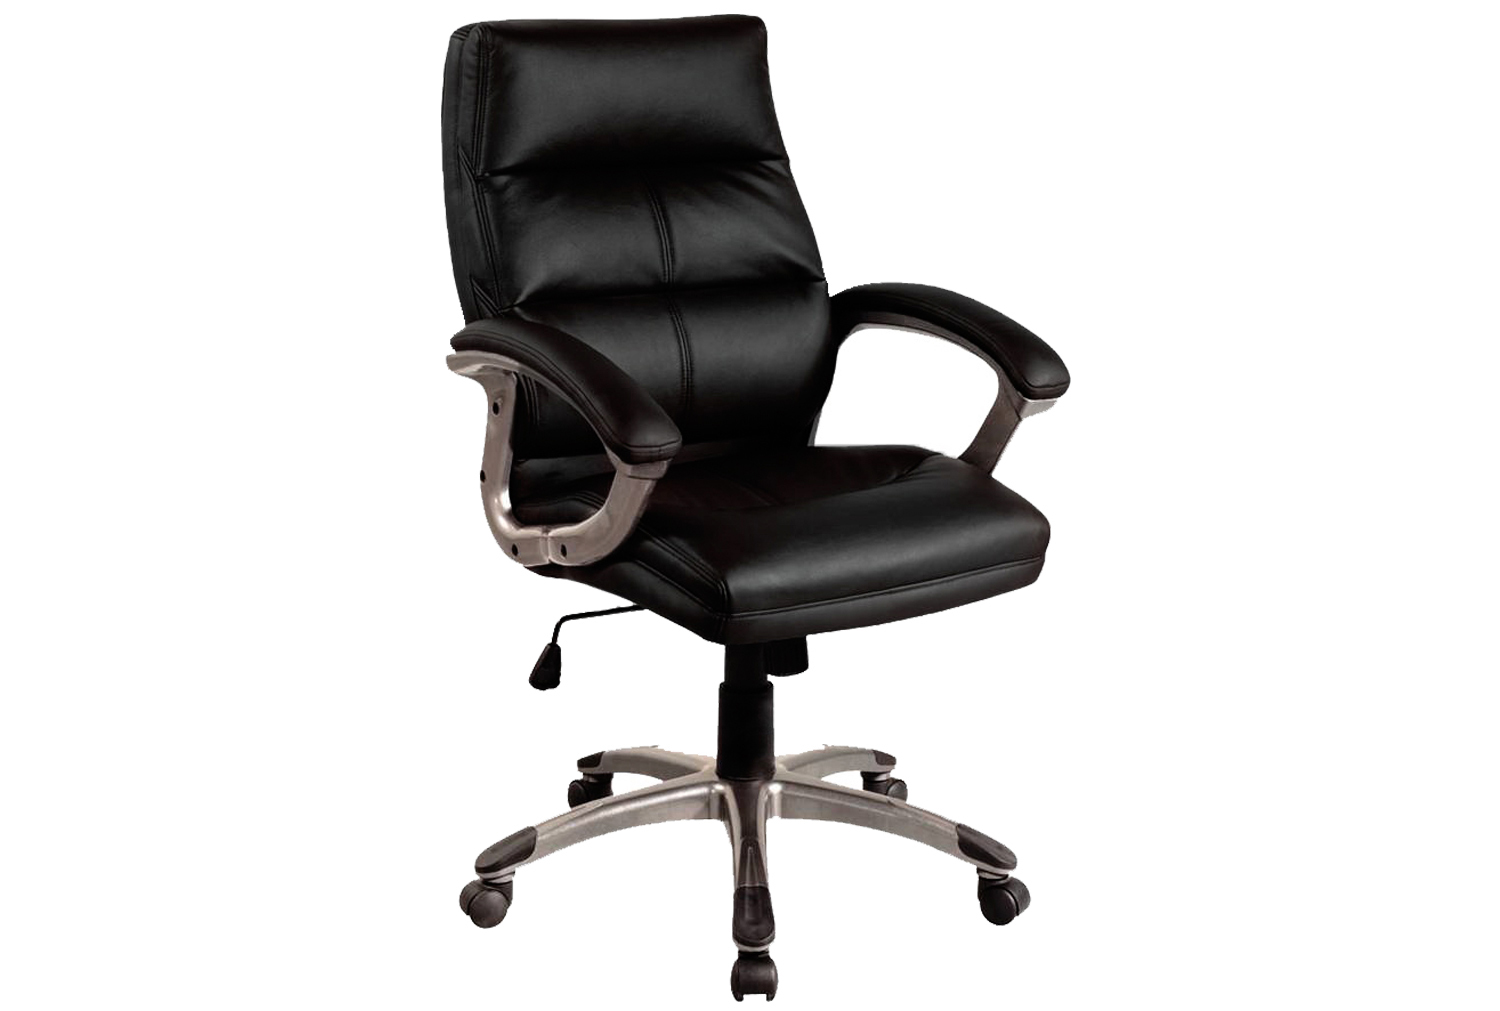 Telford Black Executive Office Chair, Fully Installed